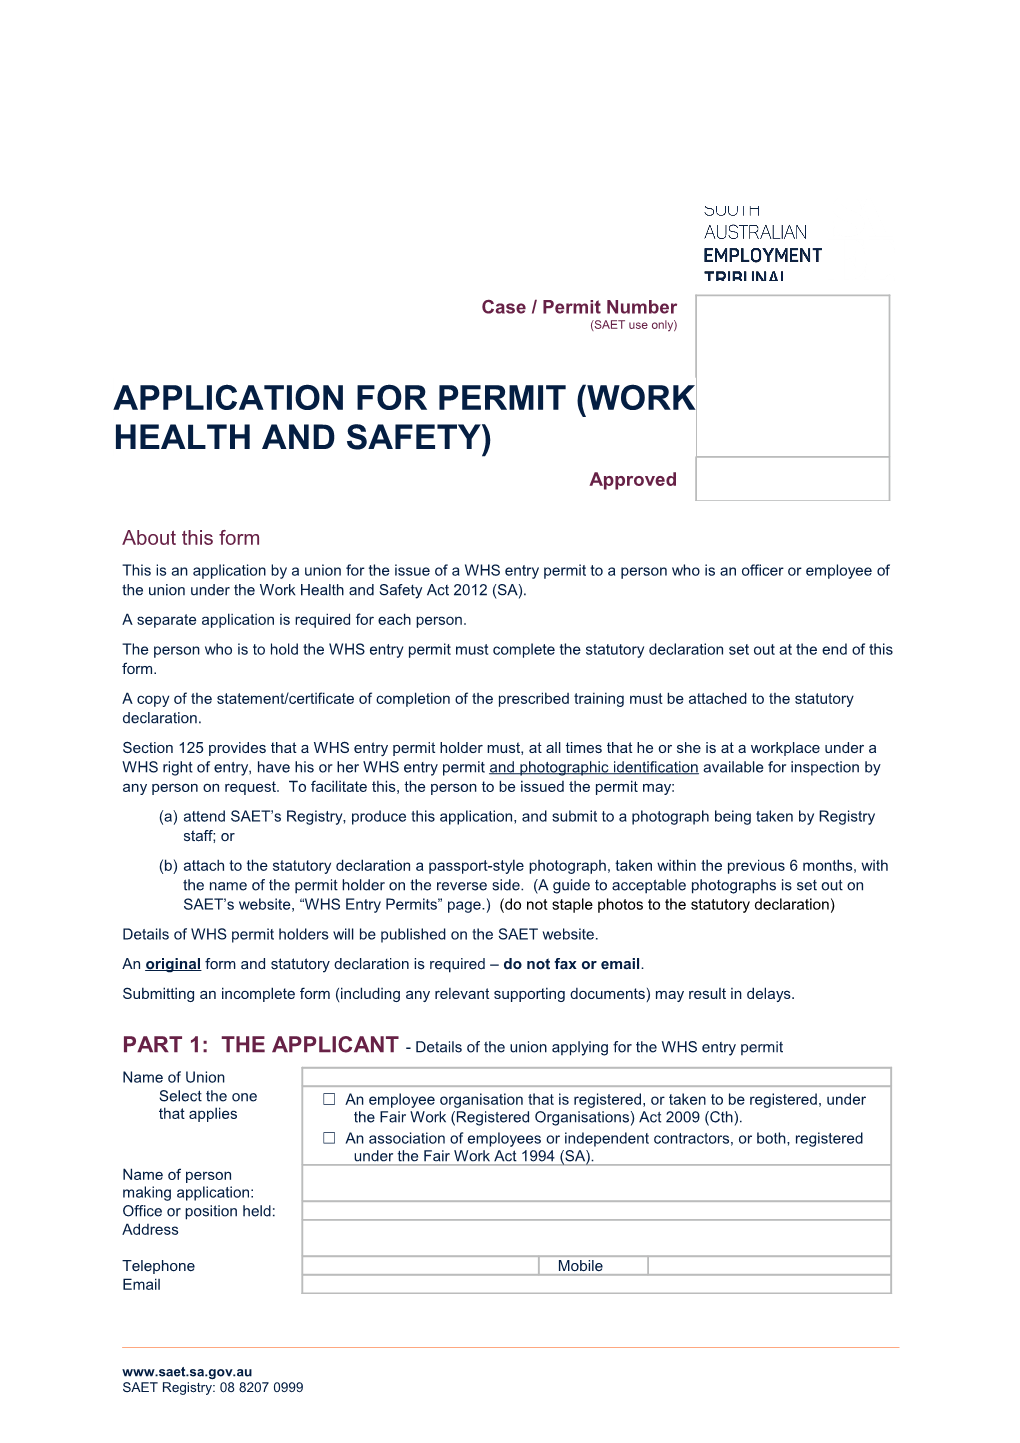 Application for Permit (Work Health and Safety)